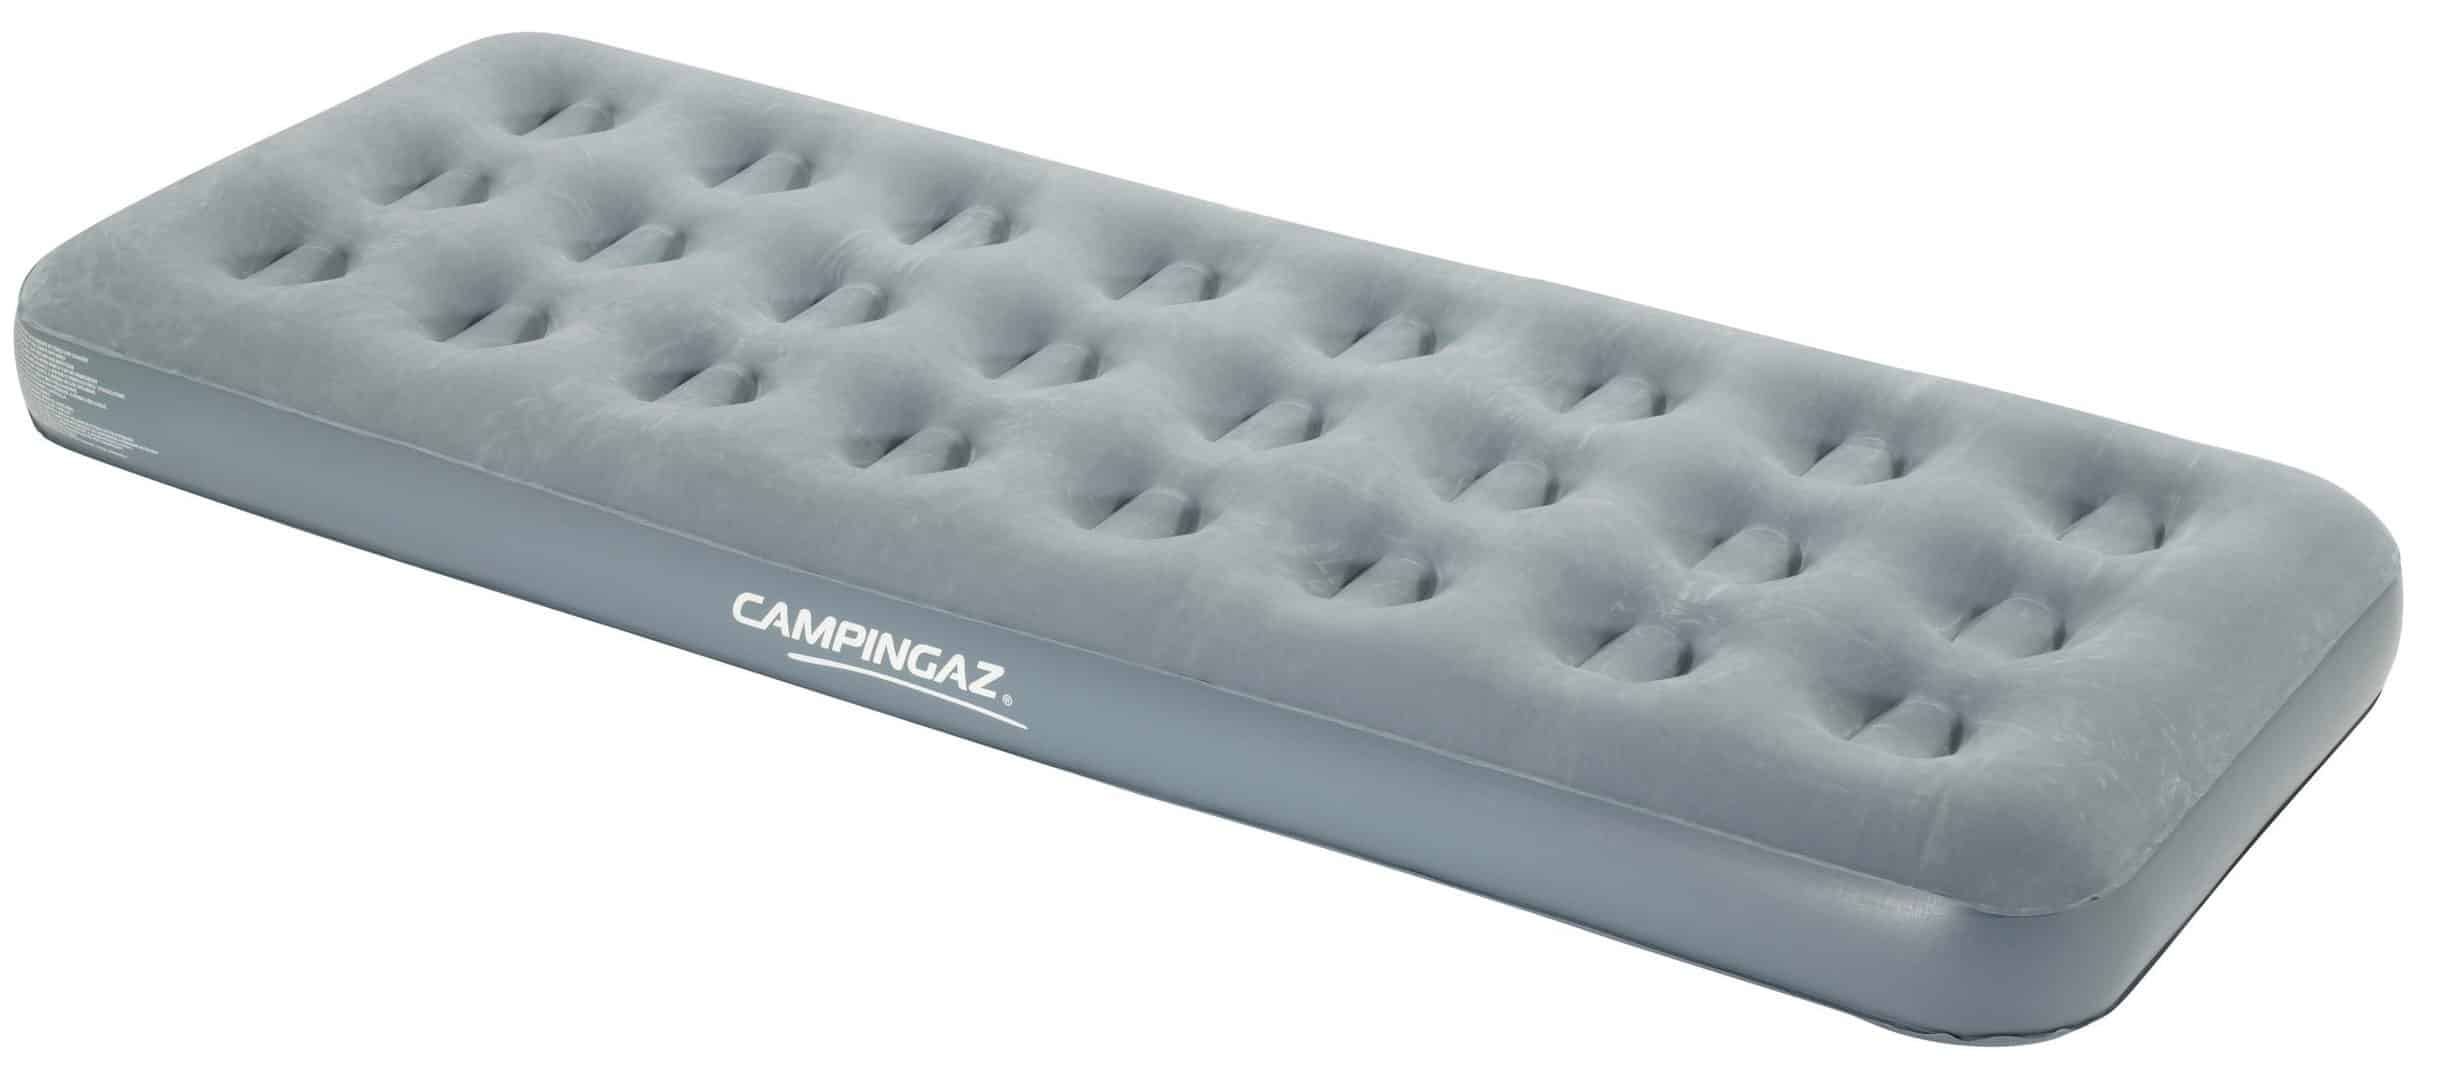 Campingaz Airbed Quickbed Single Camping Bed